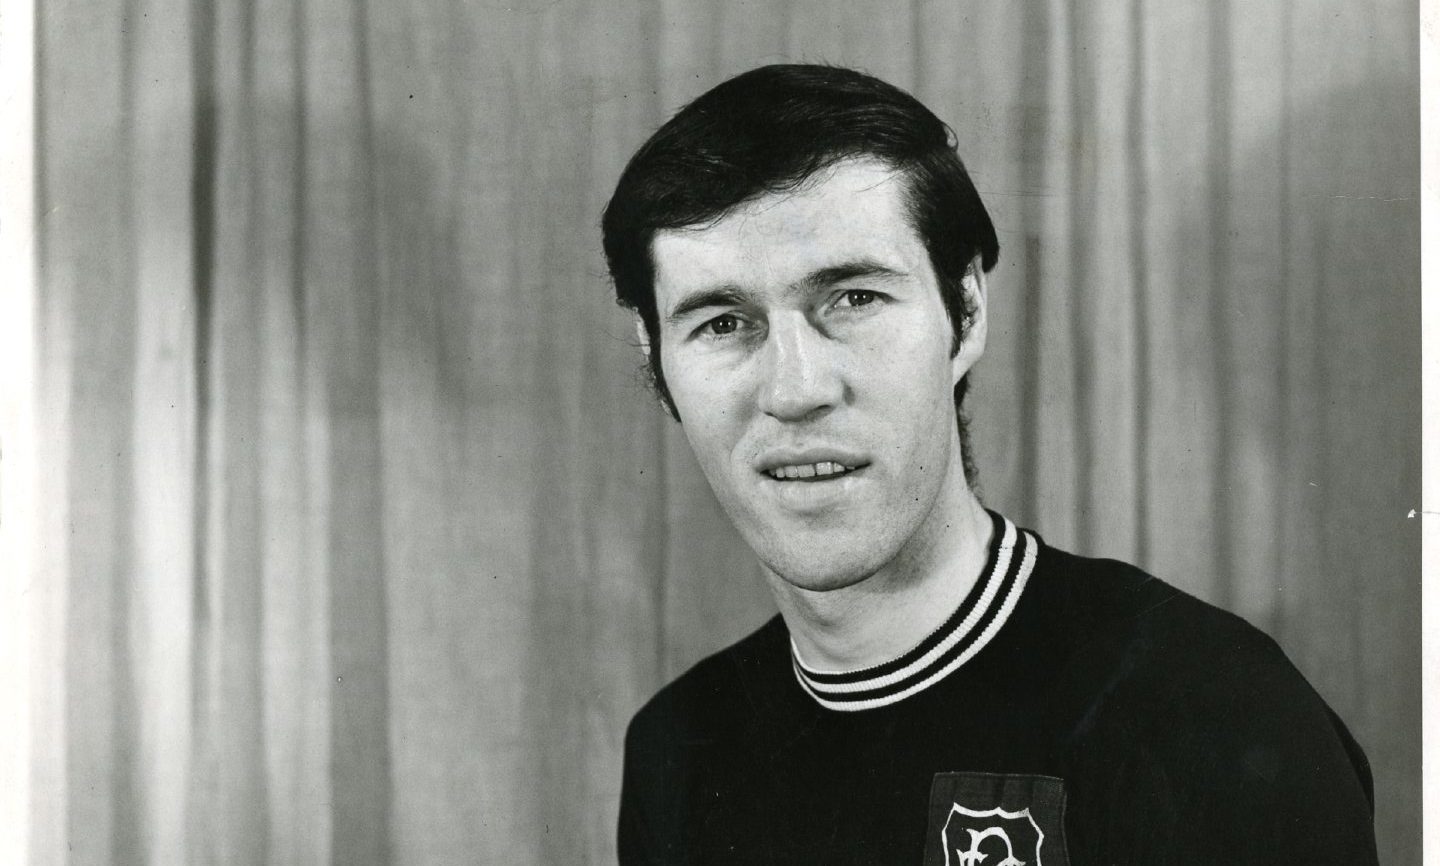 Dundee hero George McLean pictured in 1968.